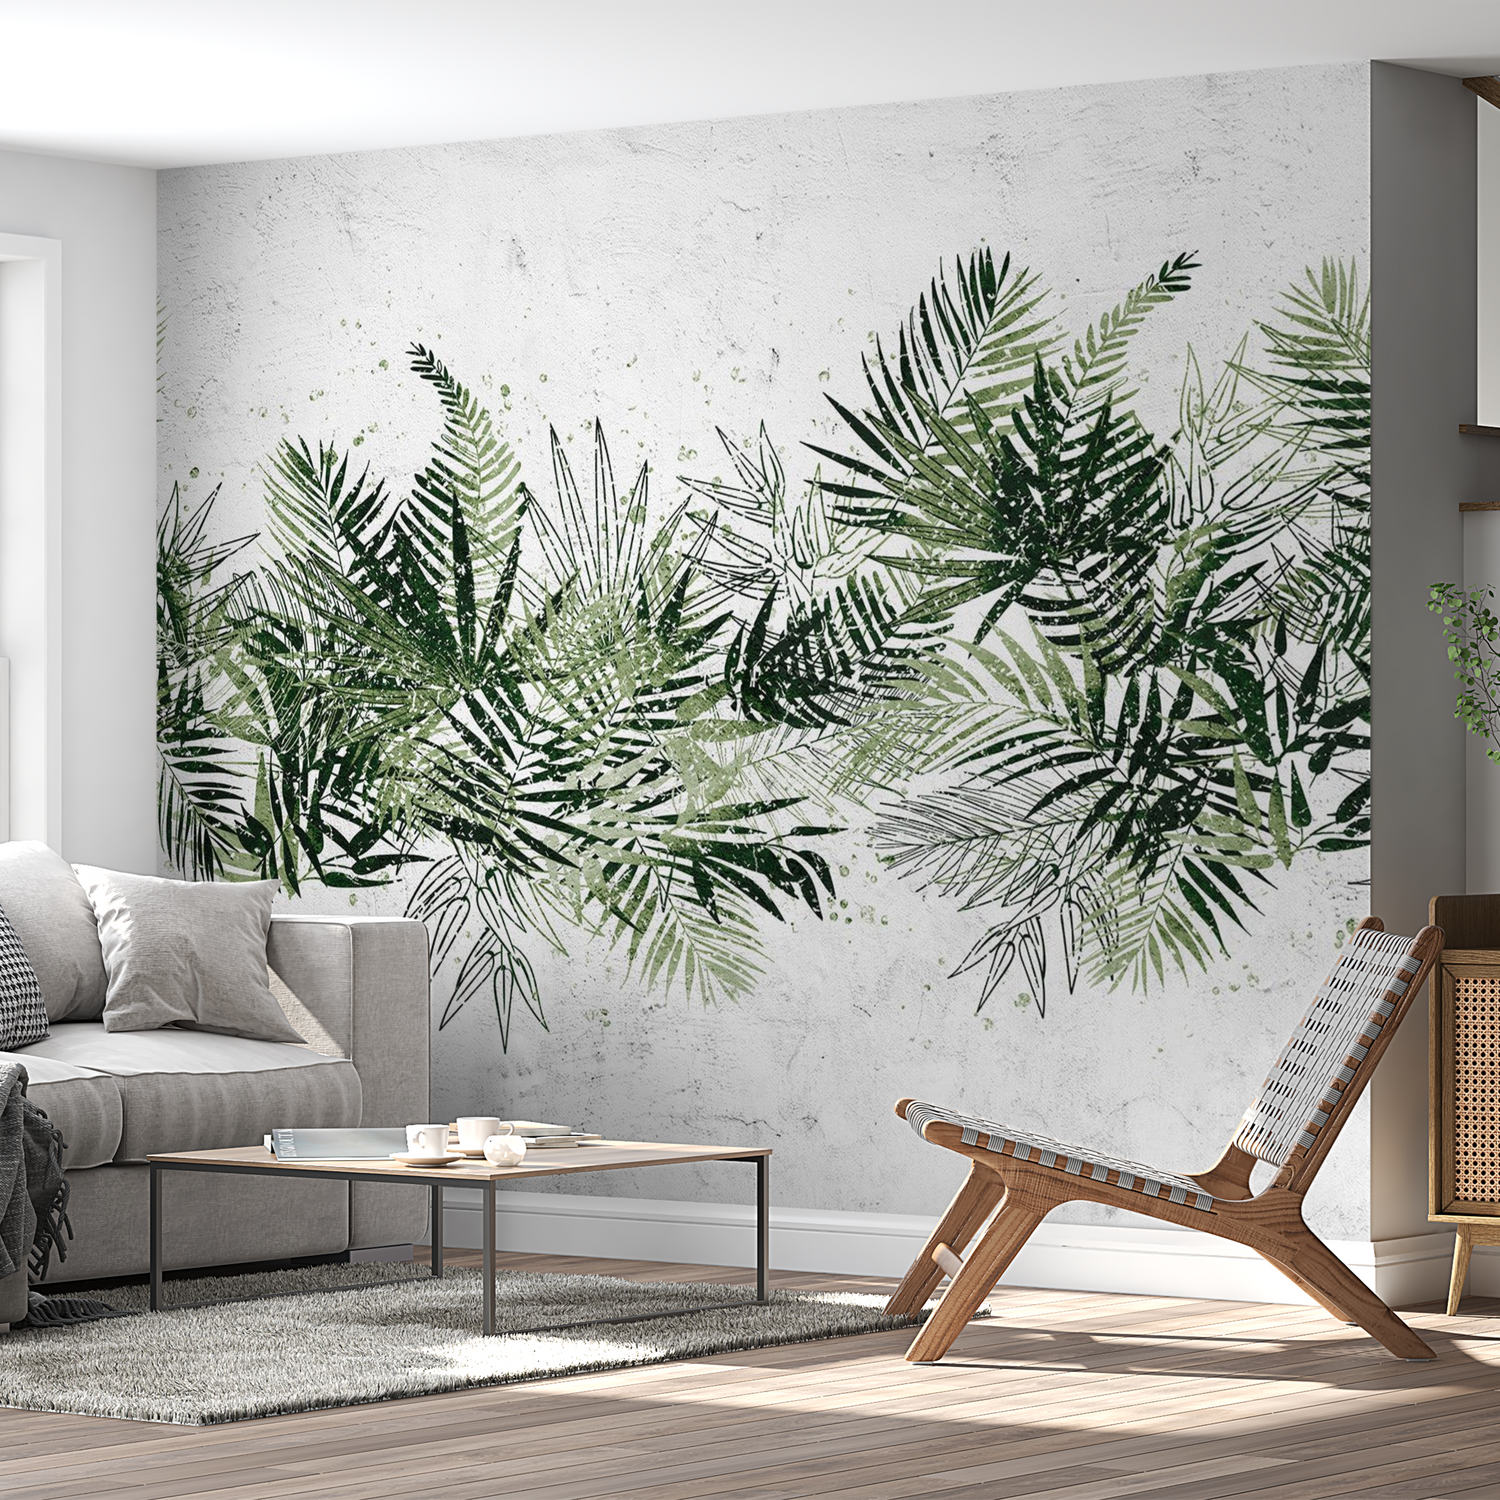 Peel & Stick Botanical Wall Mural - Jungle Tropical Leaves - Removable Wallpaper 38"Wx27"H